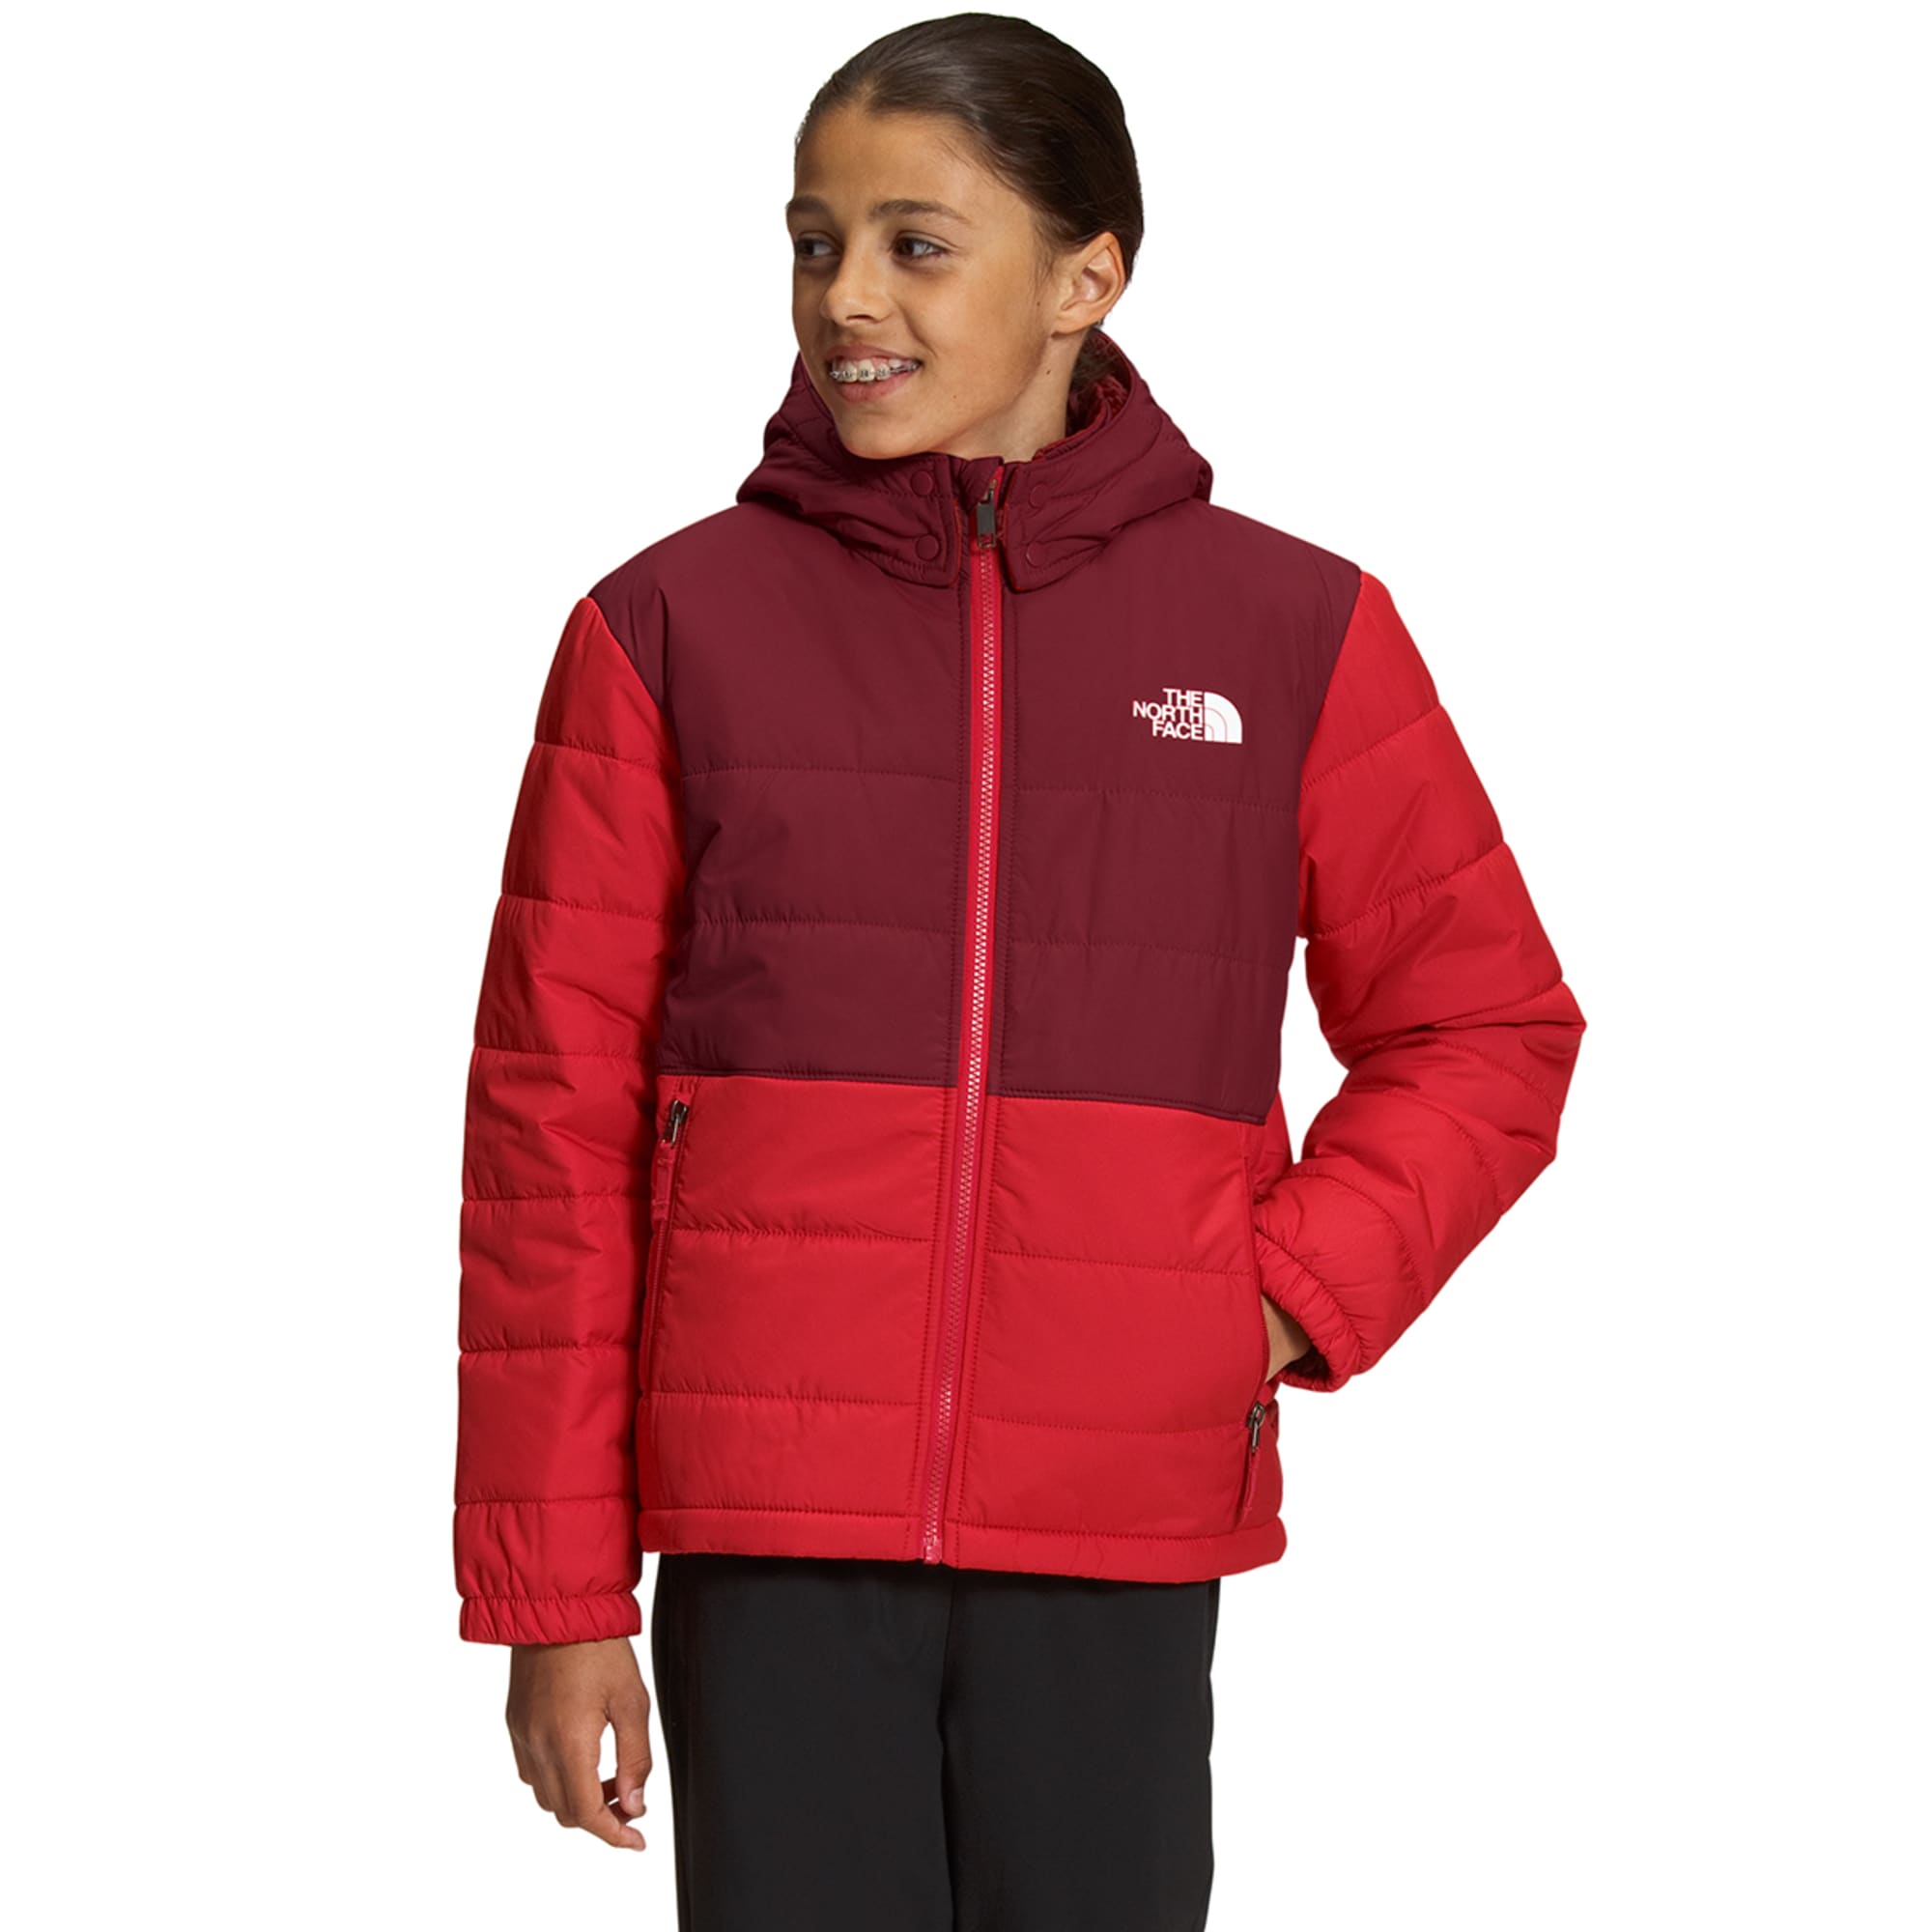 THE NORTH FACE Kids' Mount Chimbo Reversible Full-Zip Hooded Jacket